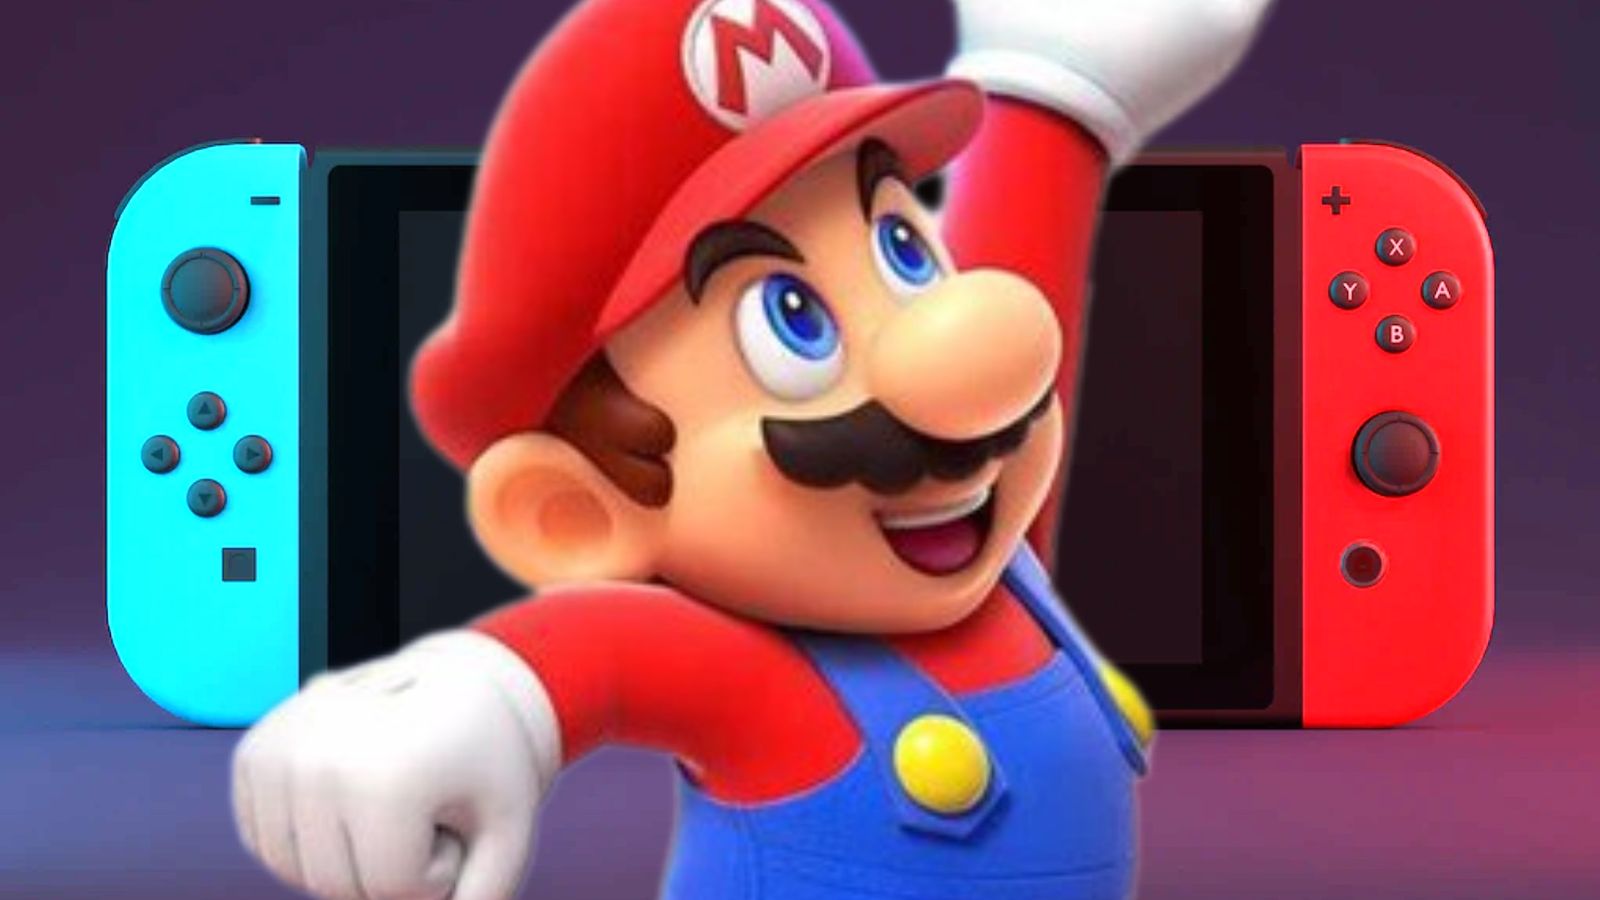 Mario posing on top of a Nintendo Switch console